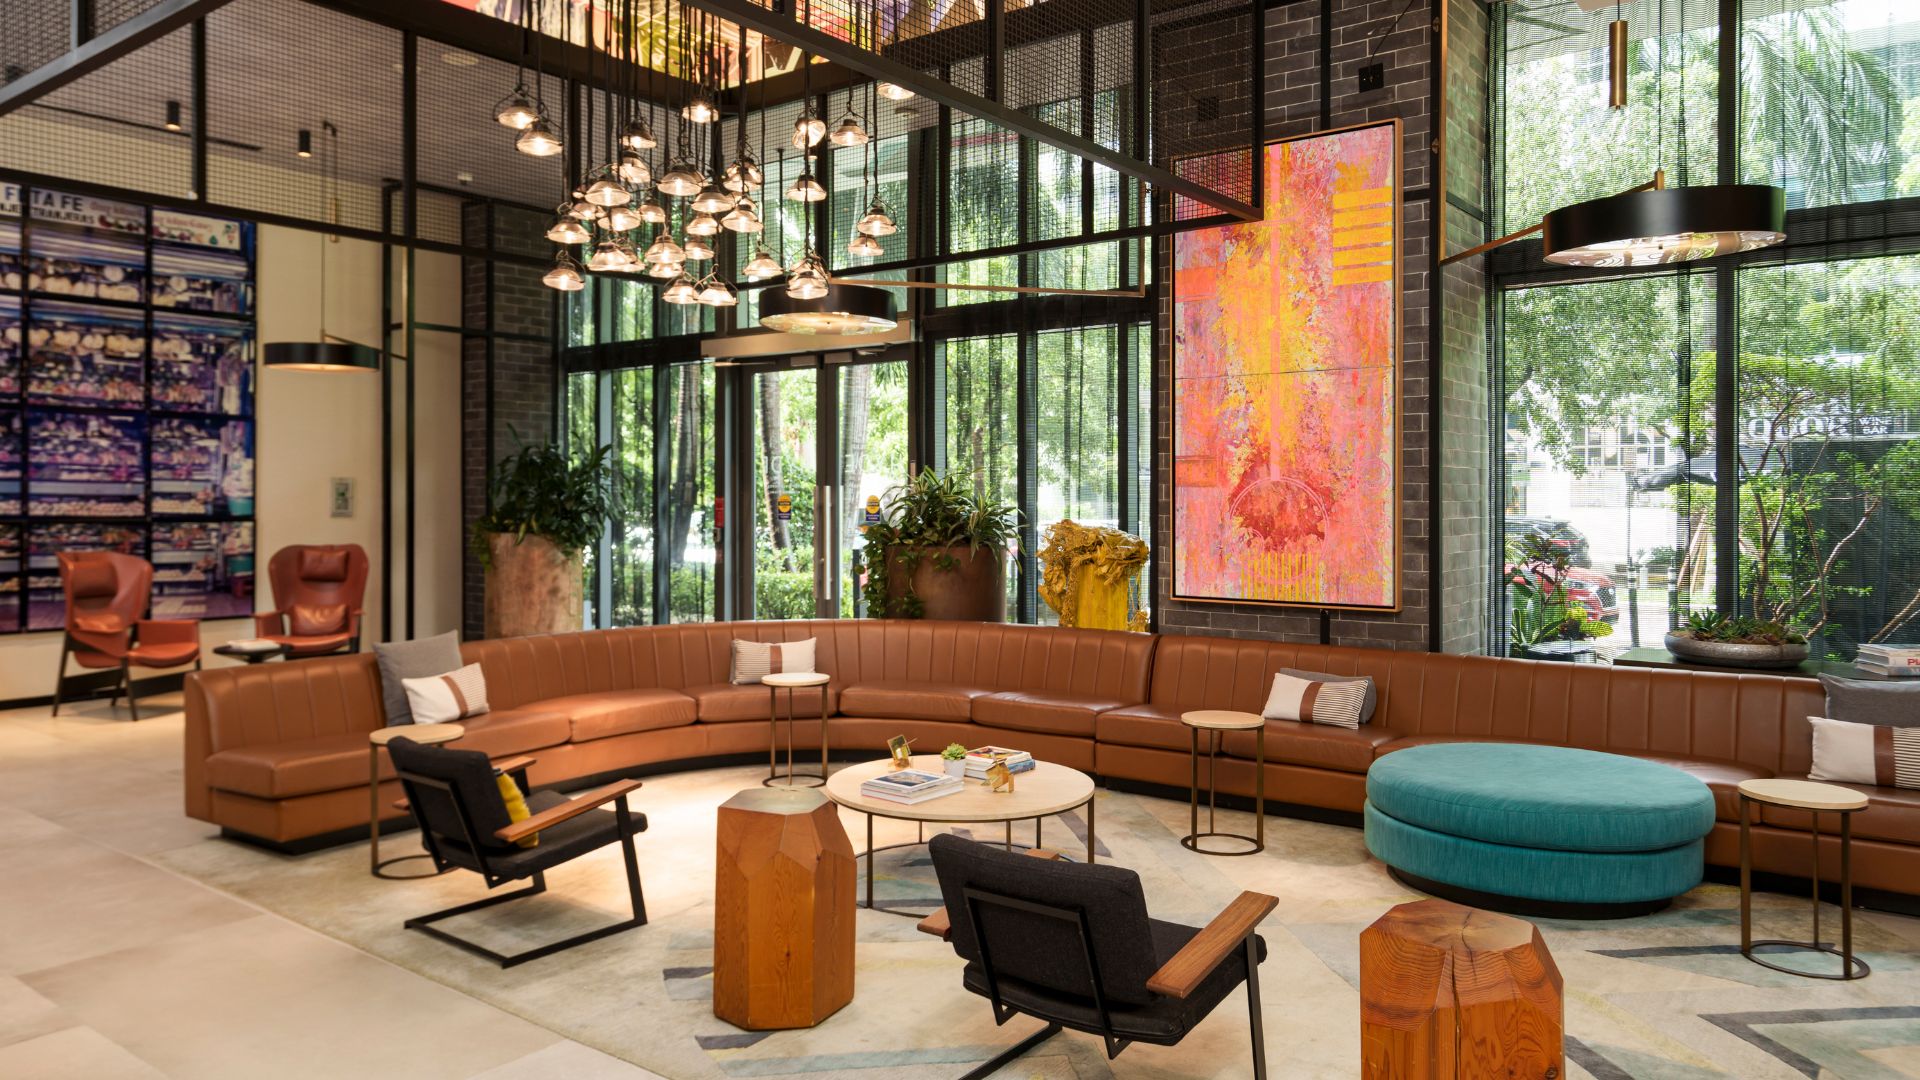 Hotel lobby with large chestnut leather sofa, teal ottoman, mixed chairs, and pendant lighting